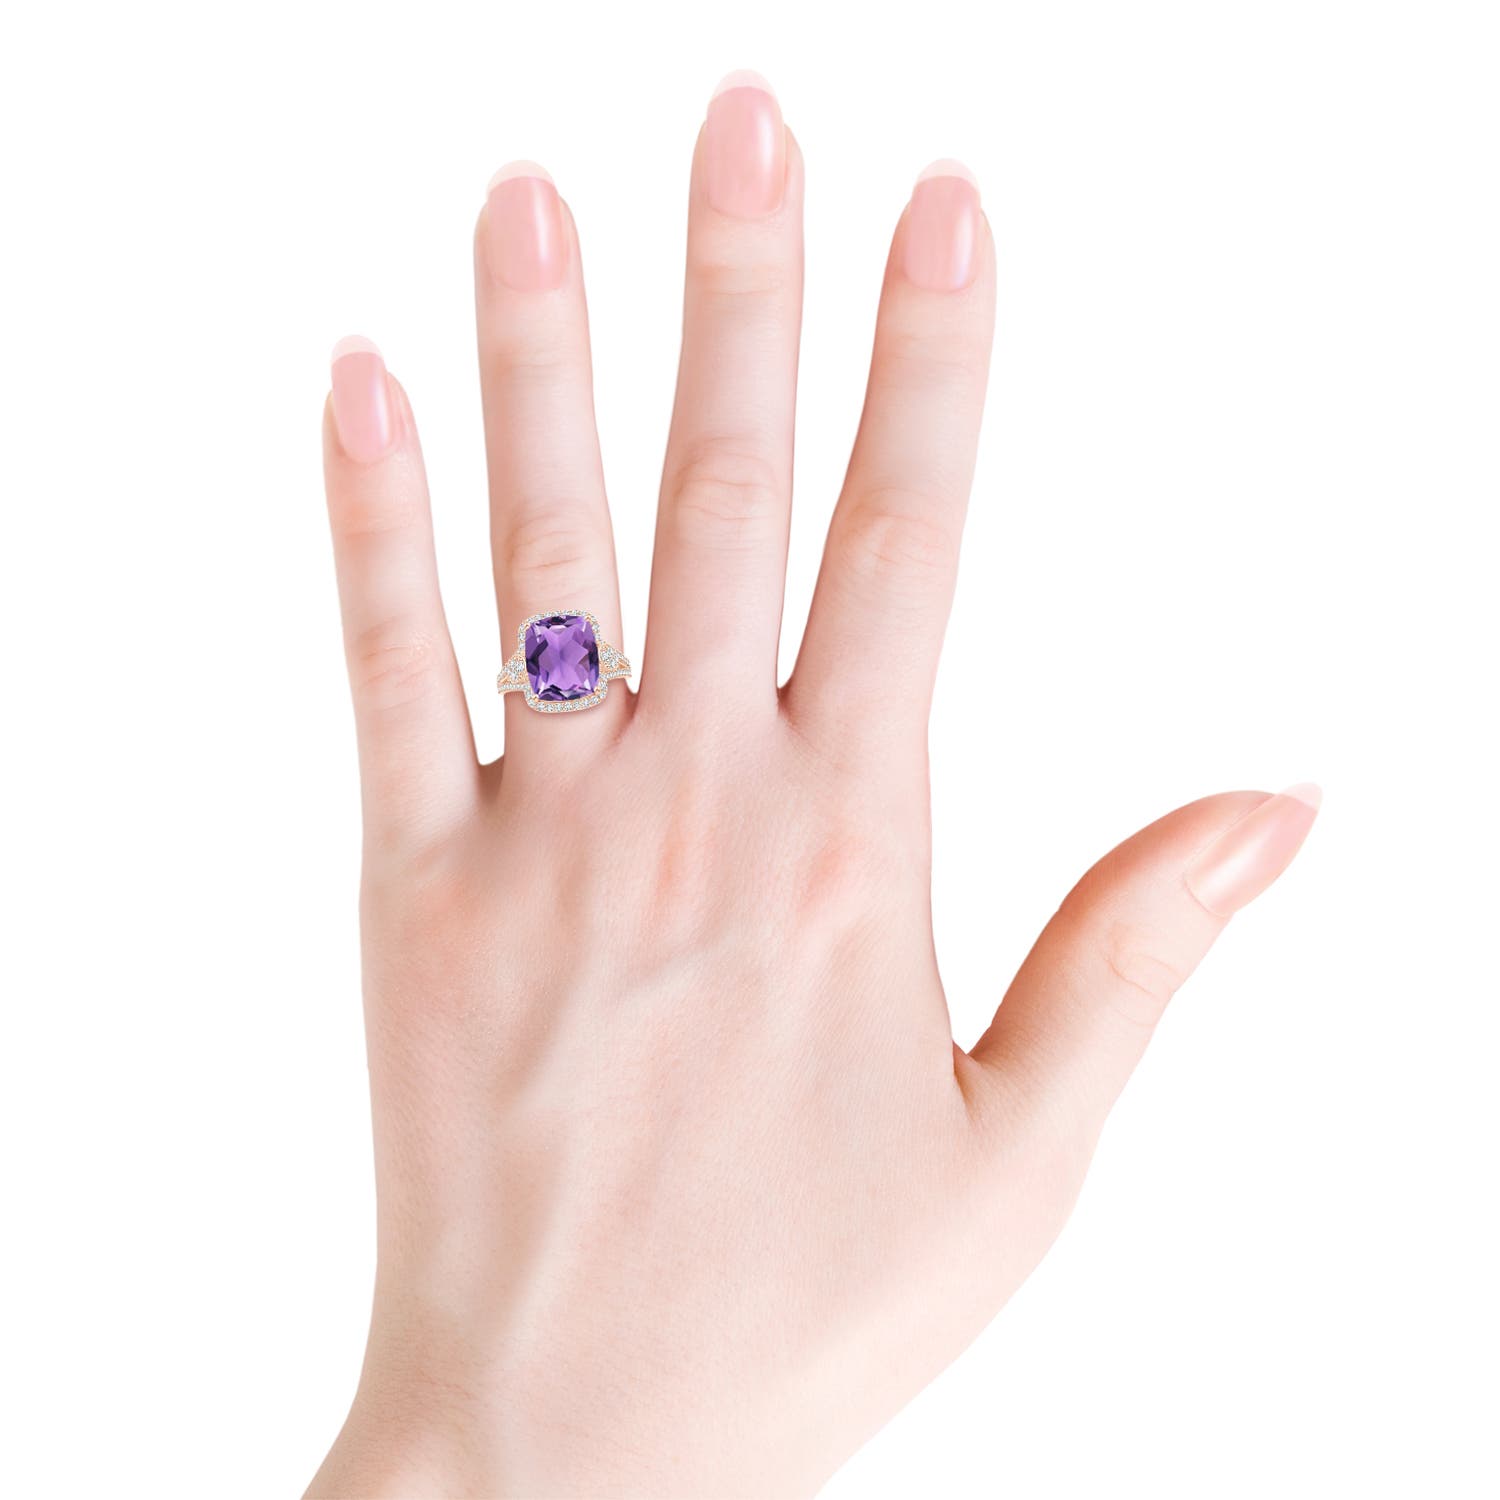 AA - Amethyst / 5.06 CT / 14 KT Rose Gold